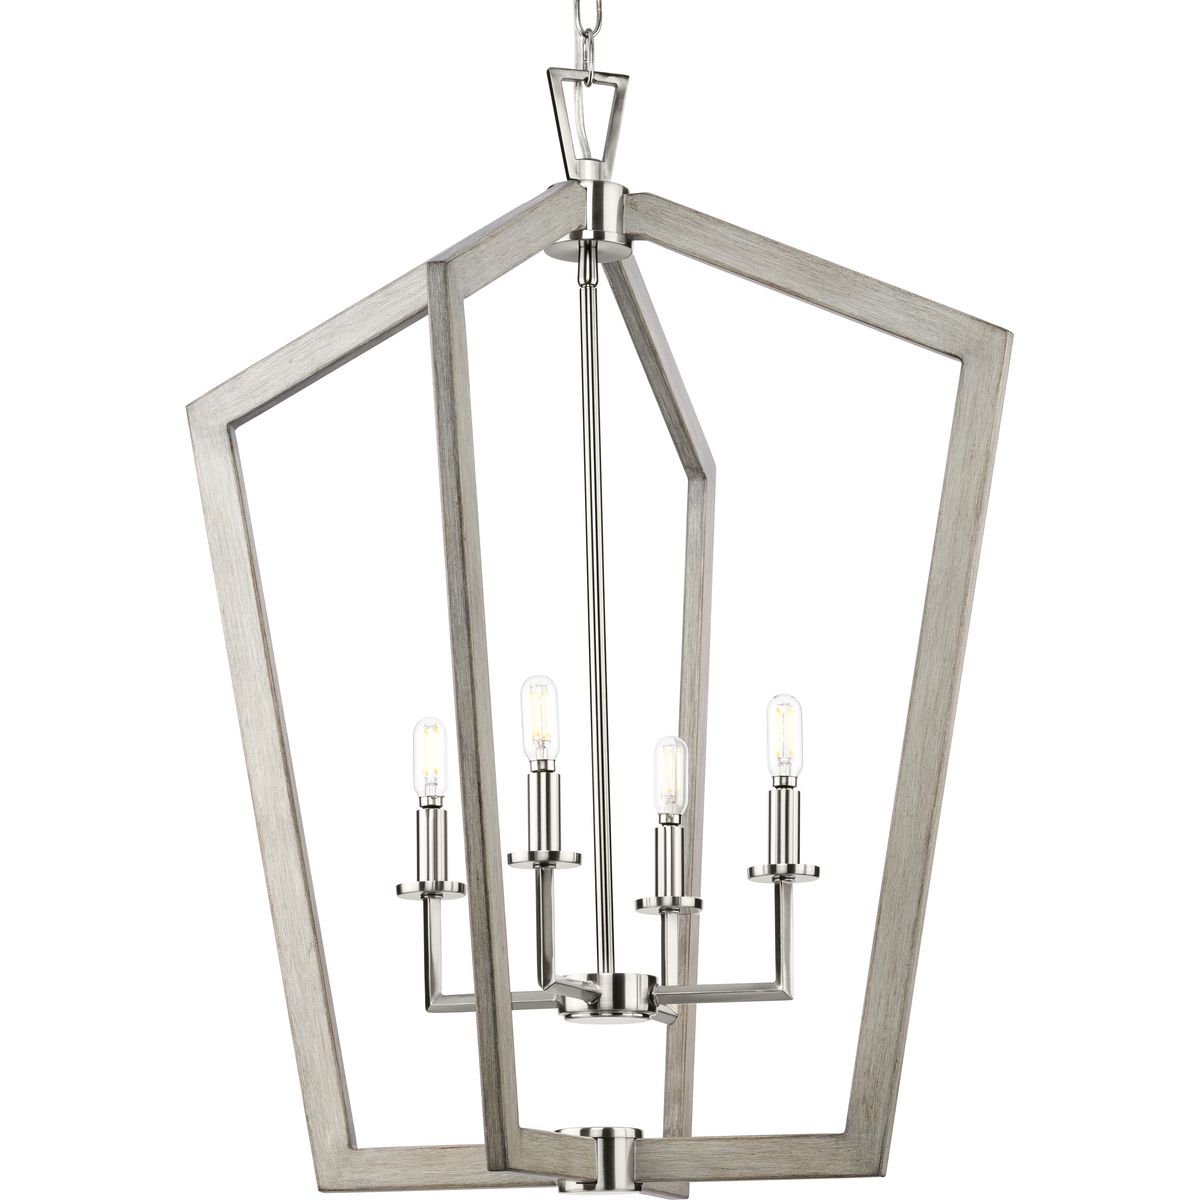 PROGRESS LIGHTING P500378-009 Brushed Nickel Galloway Collection Four-Light 30" Brushed Nickel Modern Farmhouse Foyer Light with Grey Washed Oak Accents